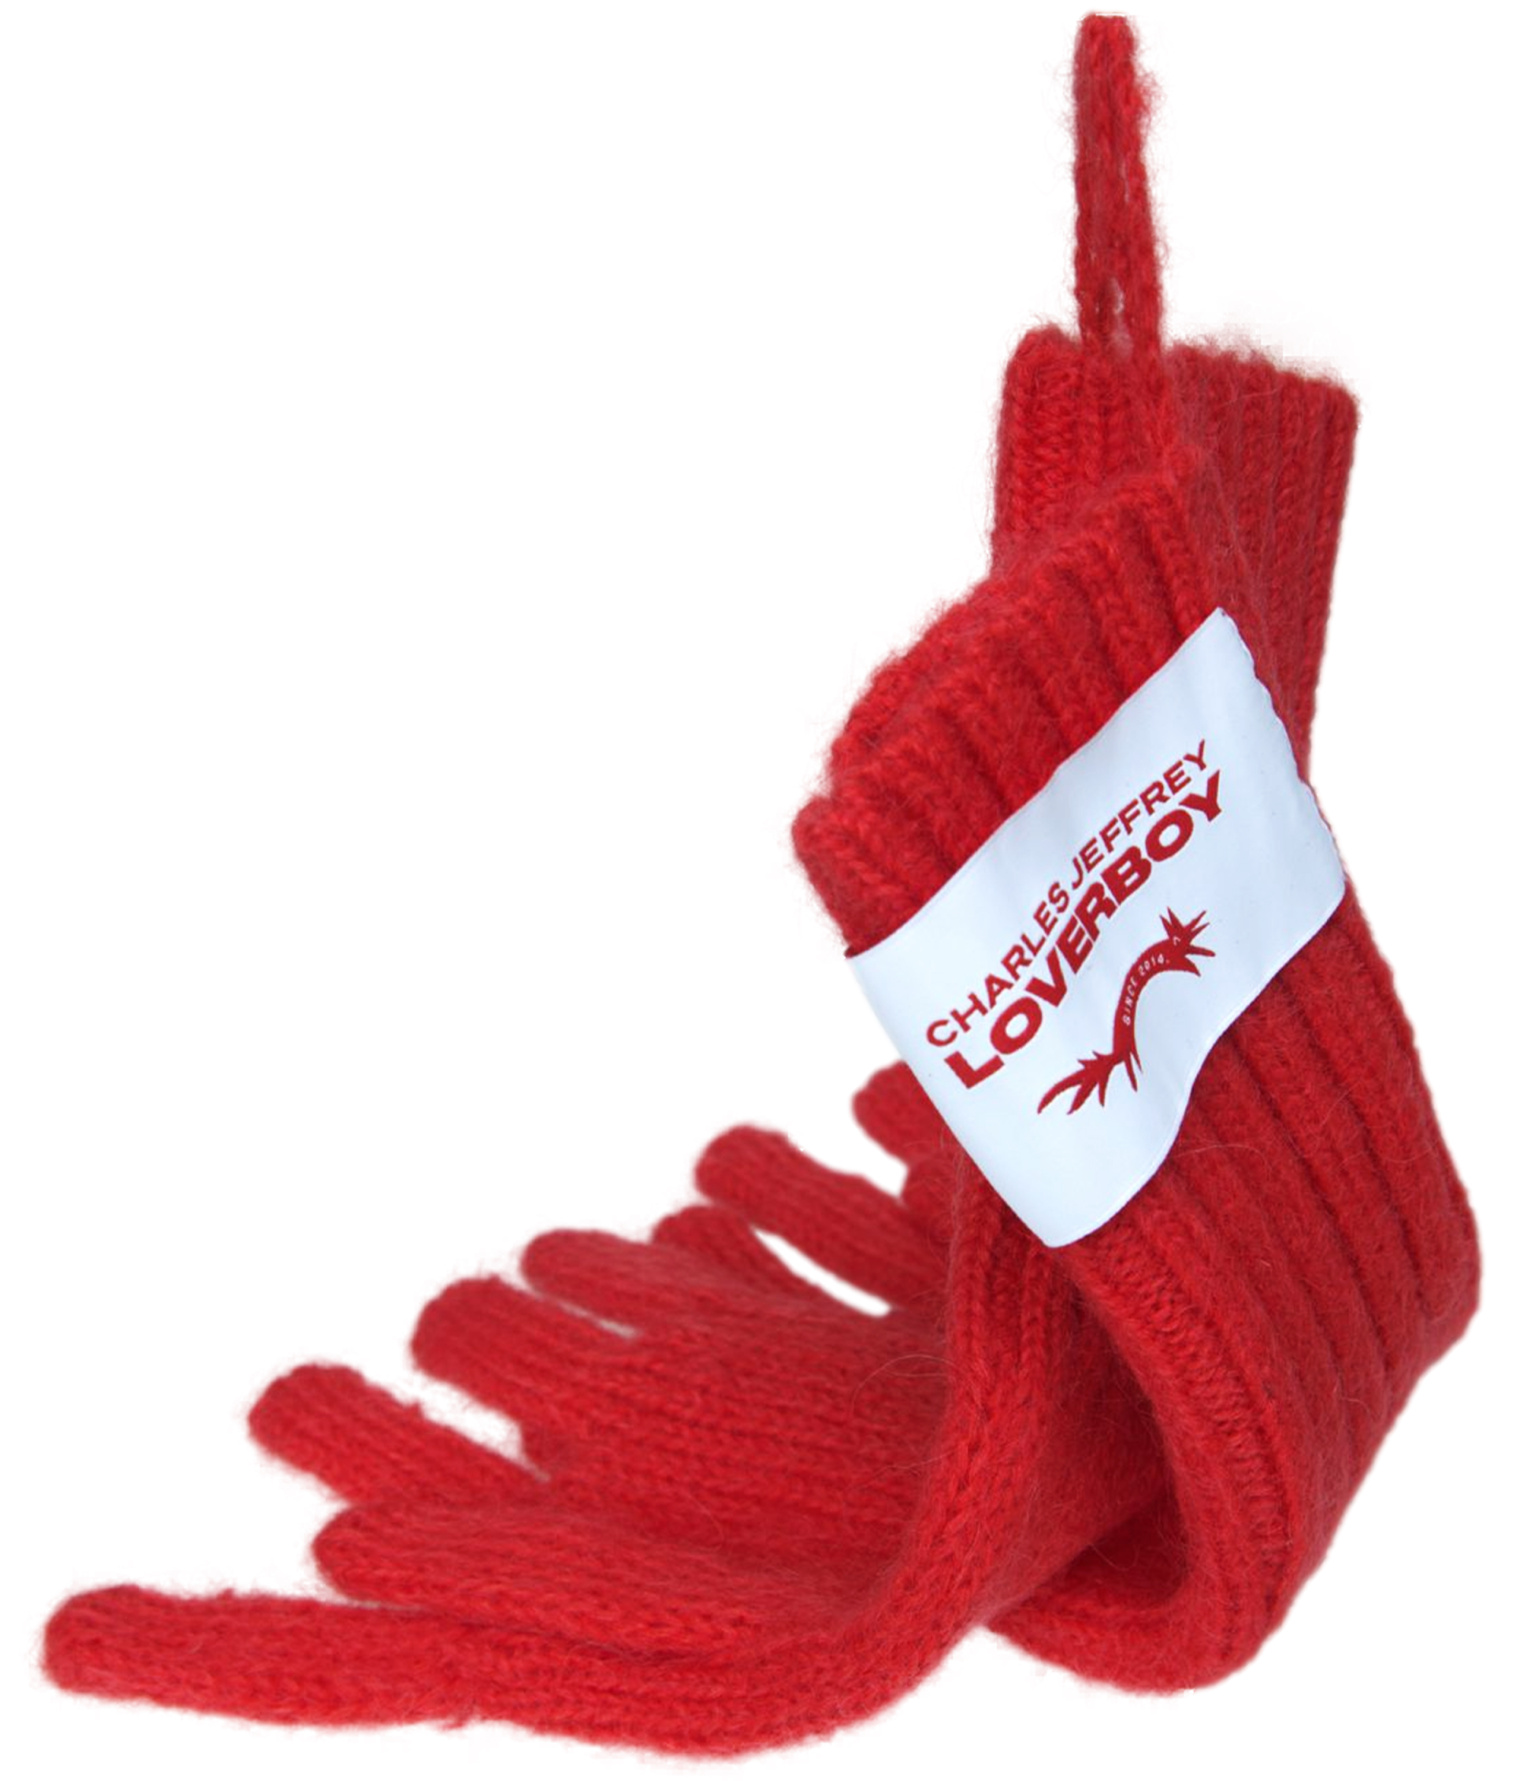 CHARLES JEFFREY LOVERBOY Red patch gloves